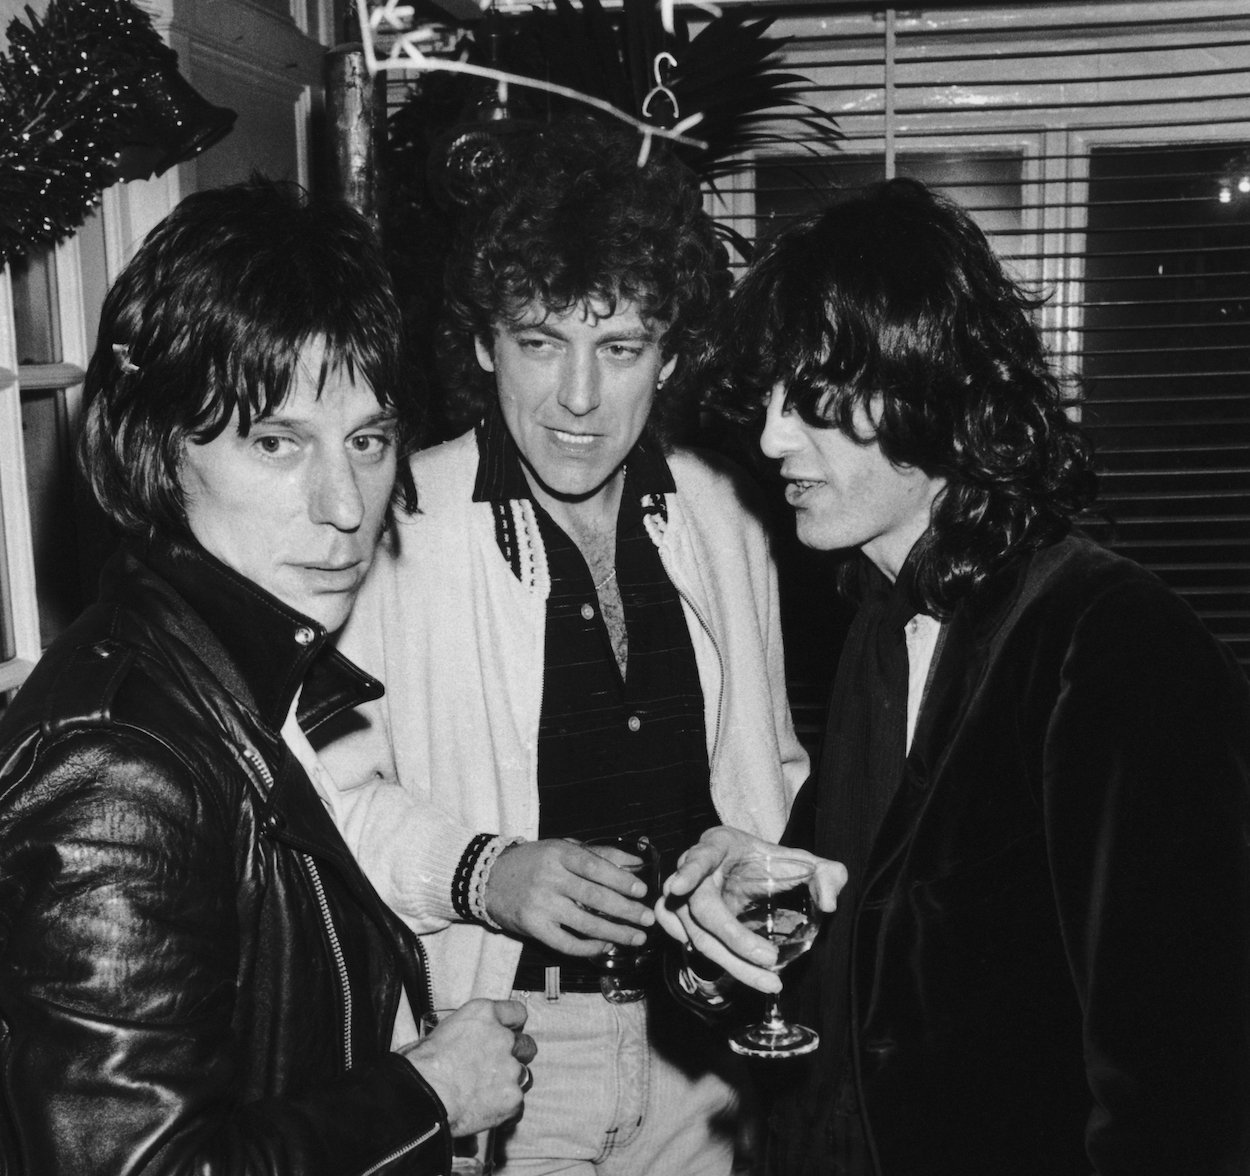 Jeff Beck Cried When Jimmy Page Played Led Zeppelin’s Version of ‘You Shook Me,’ and it May Have Been Because Zep’s Version Is Far Better